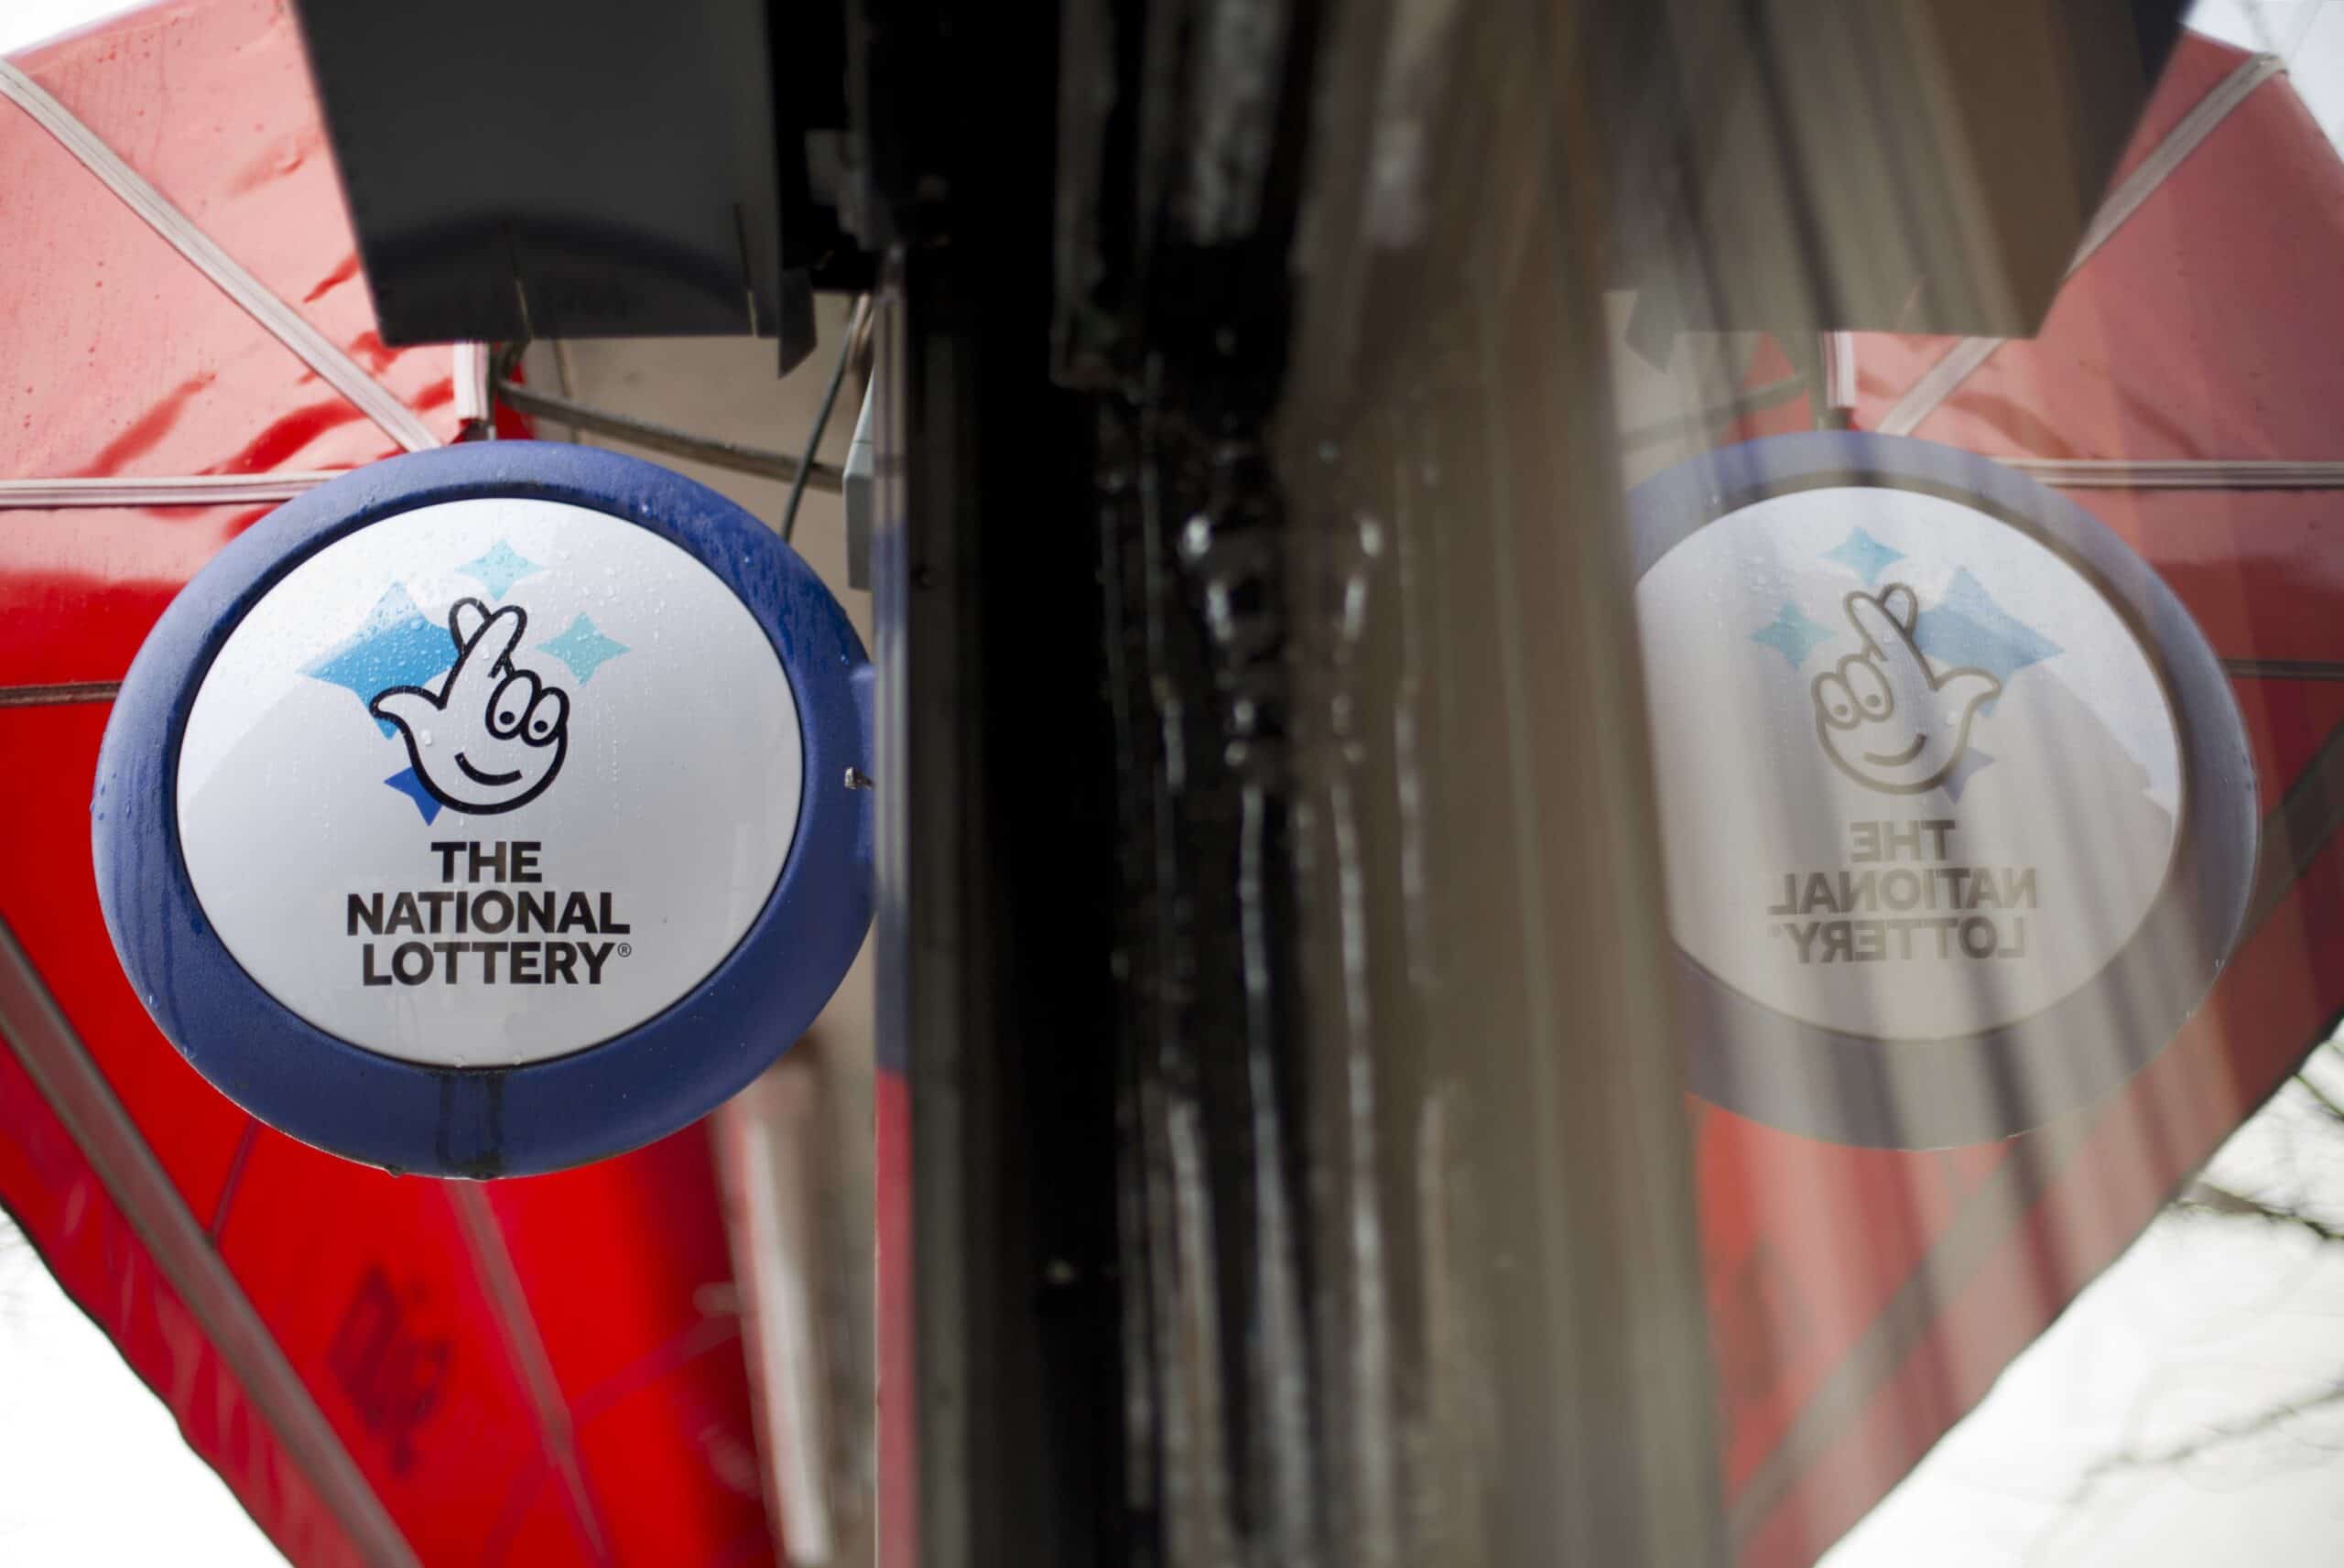 The National Lottery in figures